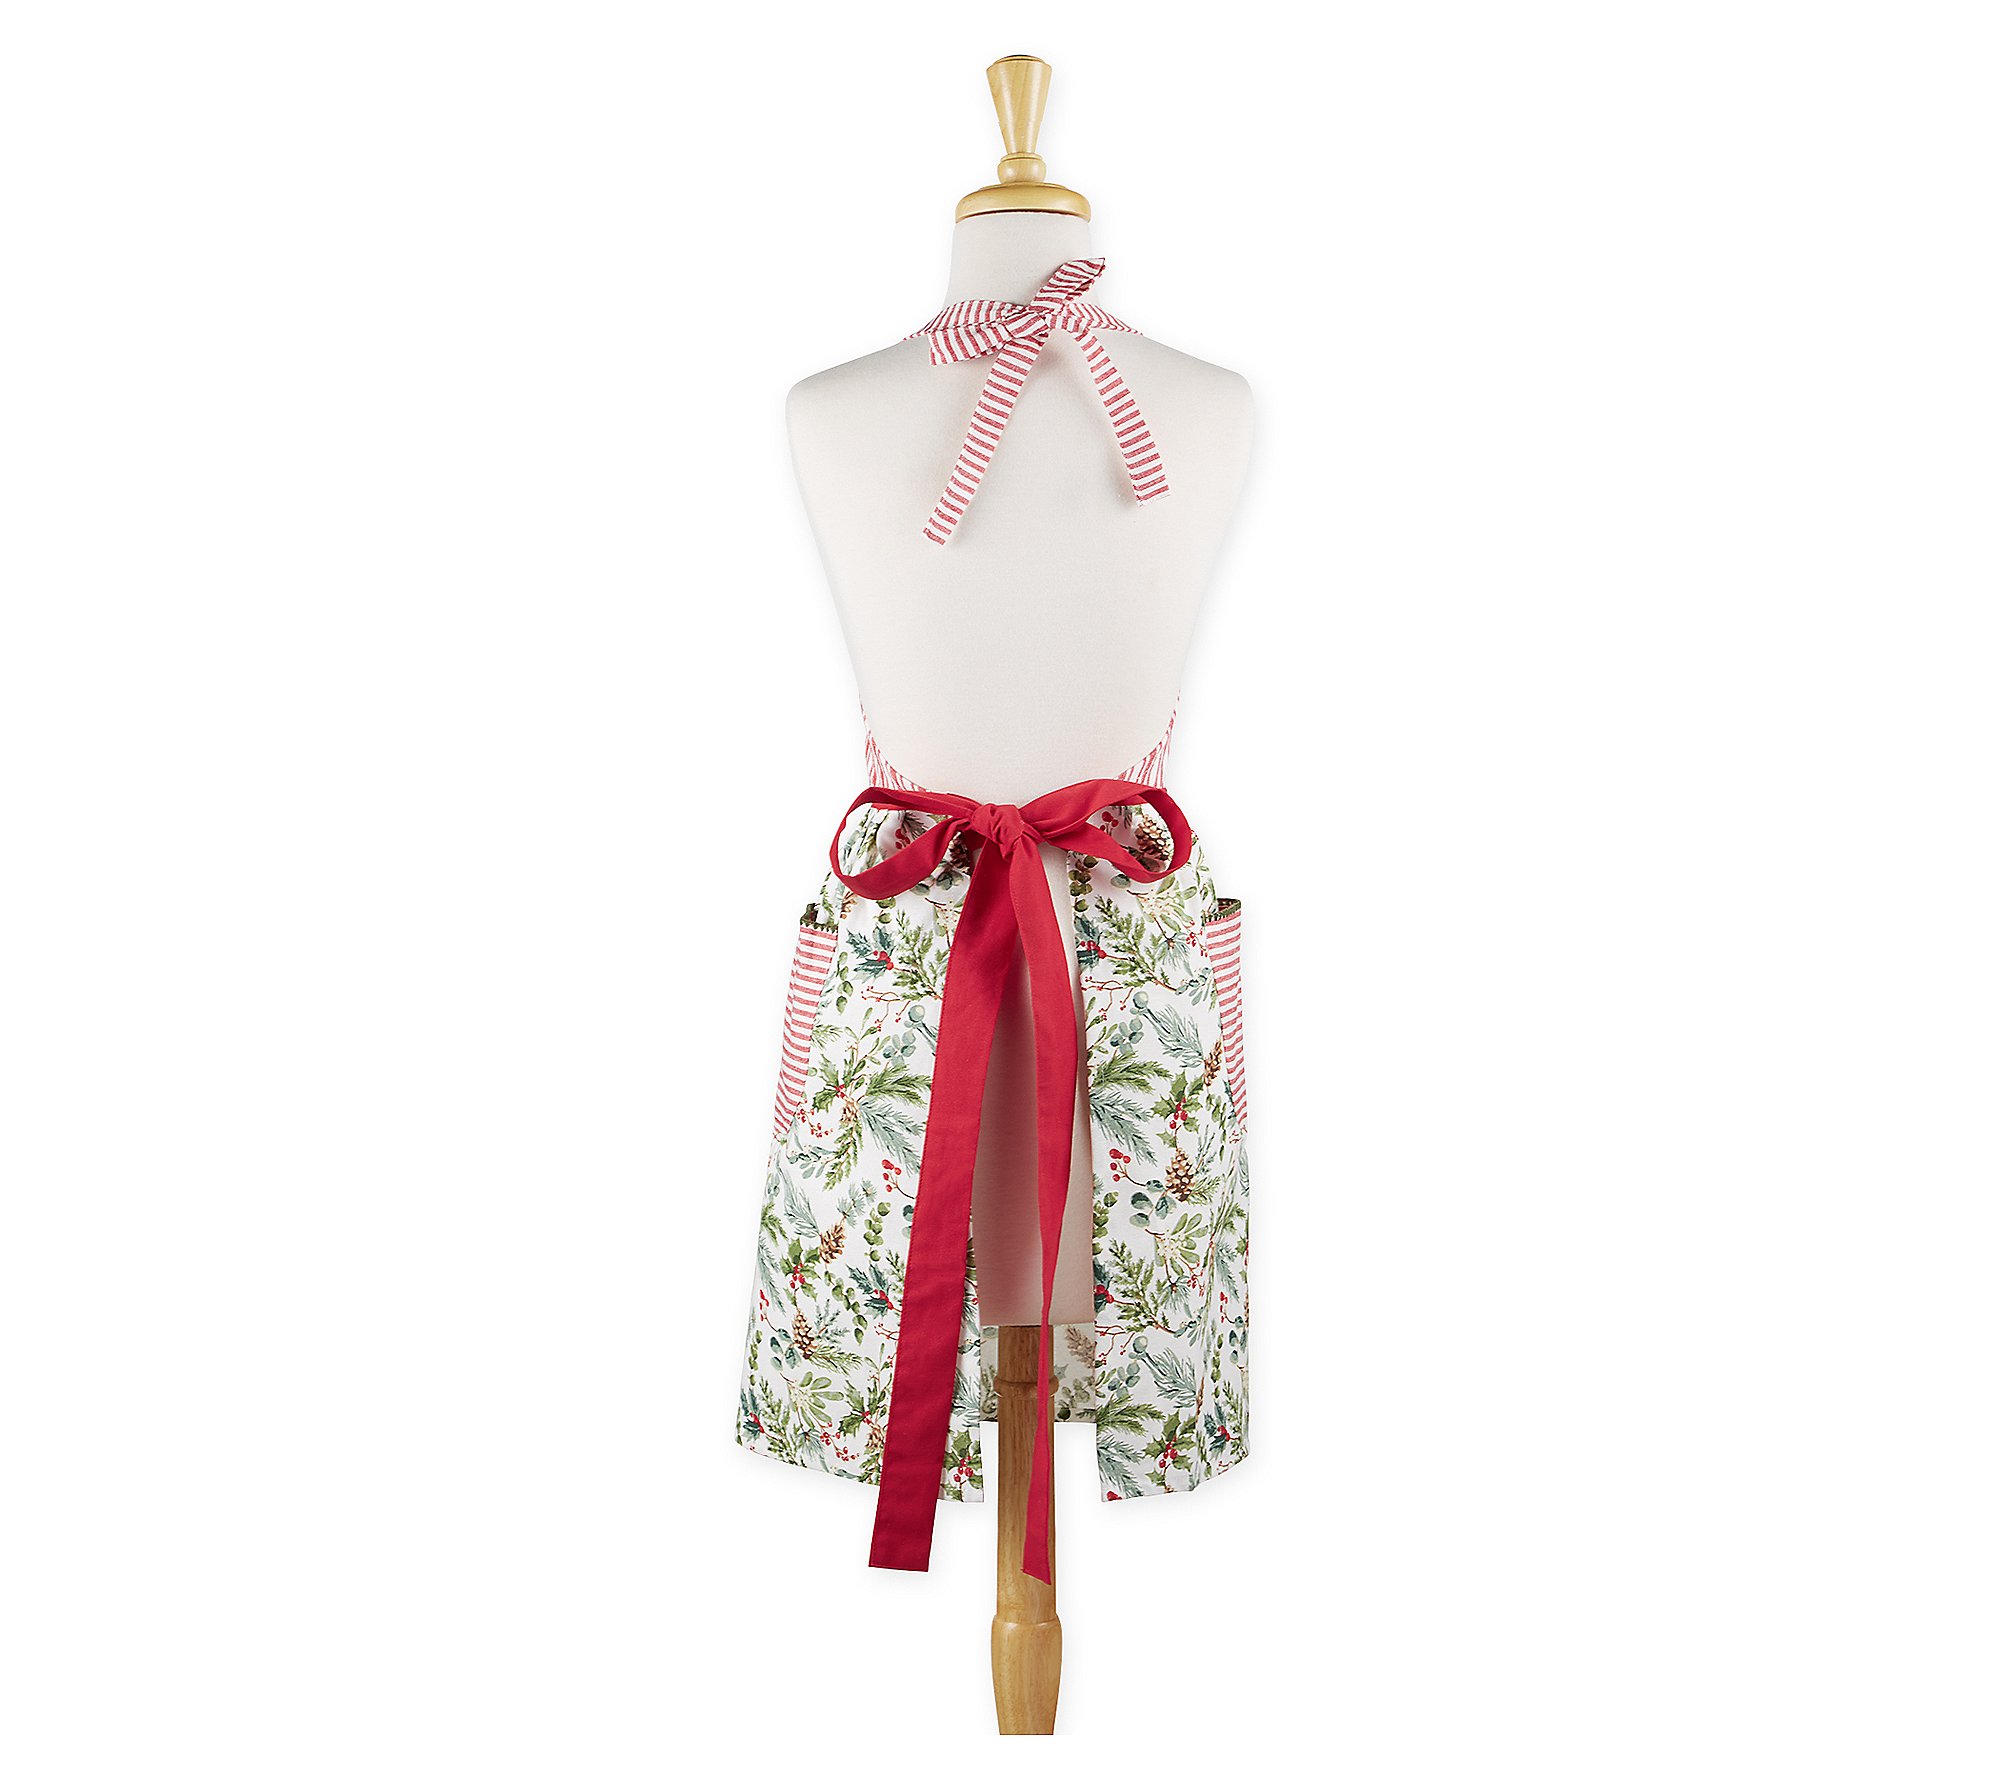 Design Imports Merry Holiday Sprigs Printed Apron